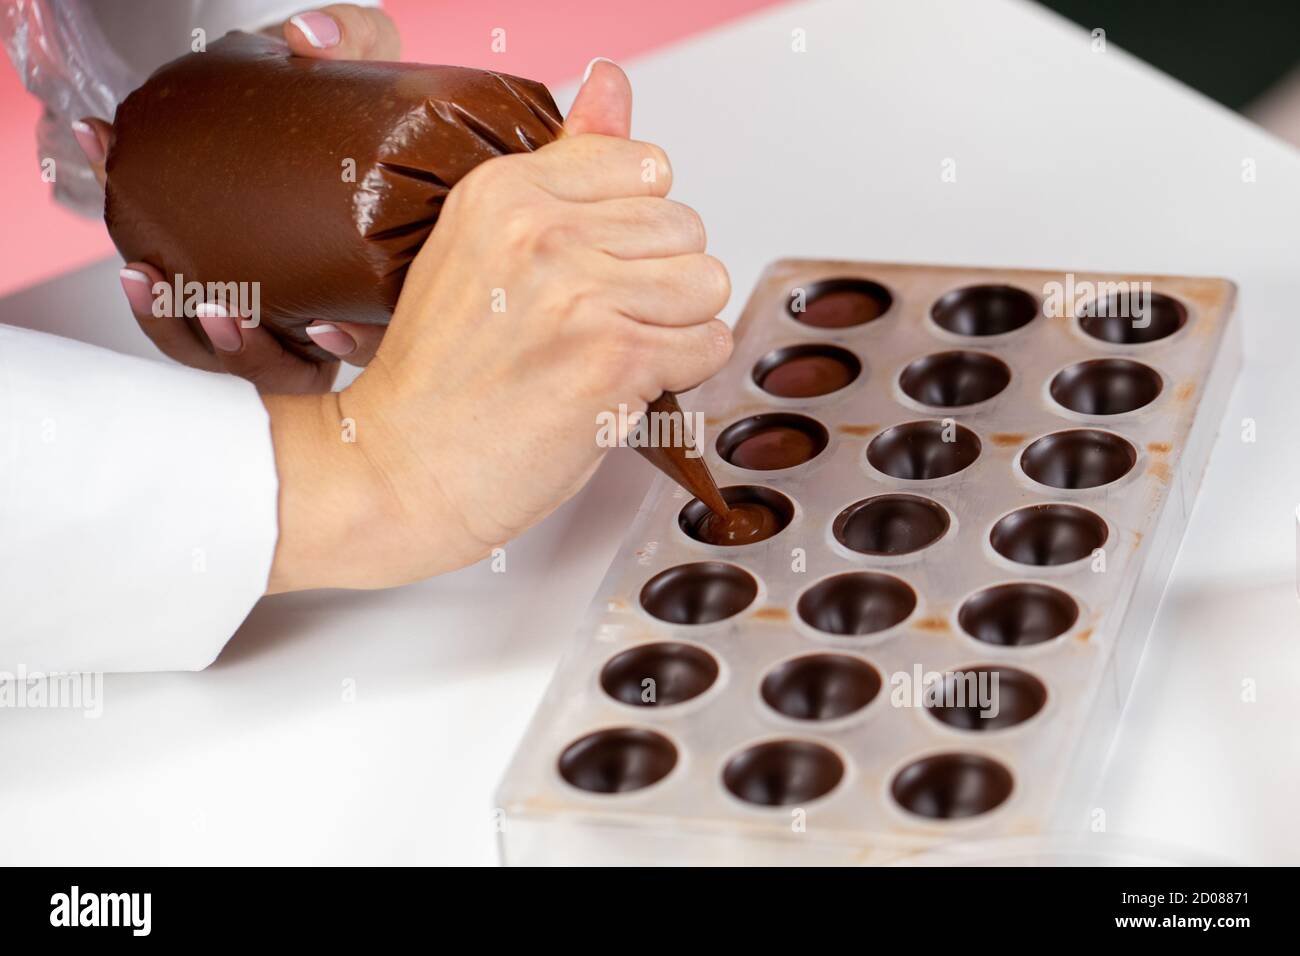 chocolatier pouring caramel filling into chocolate mold preparing handmade  candy Stock Photo - Alamy